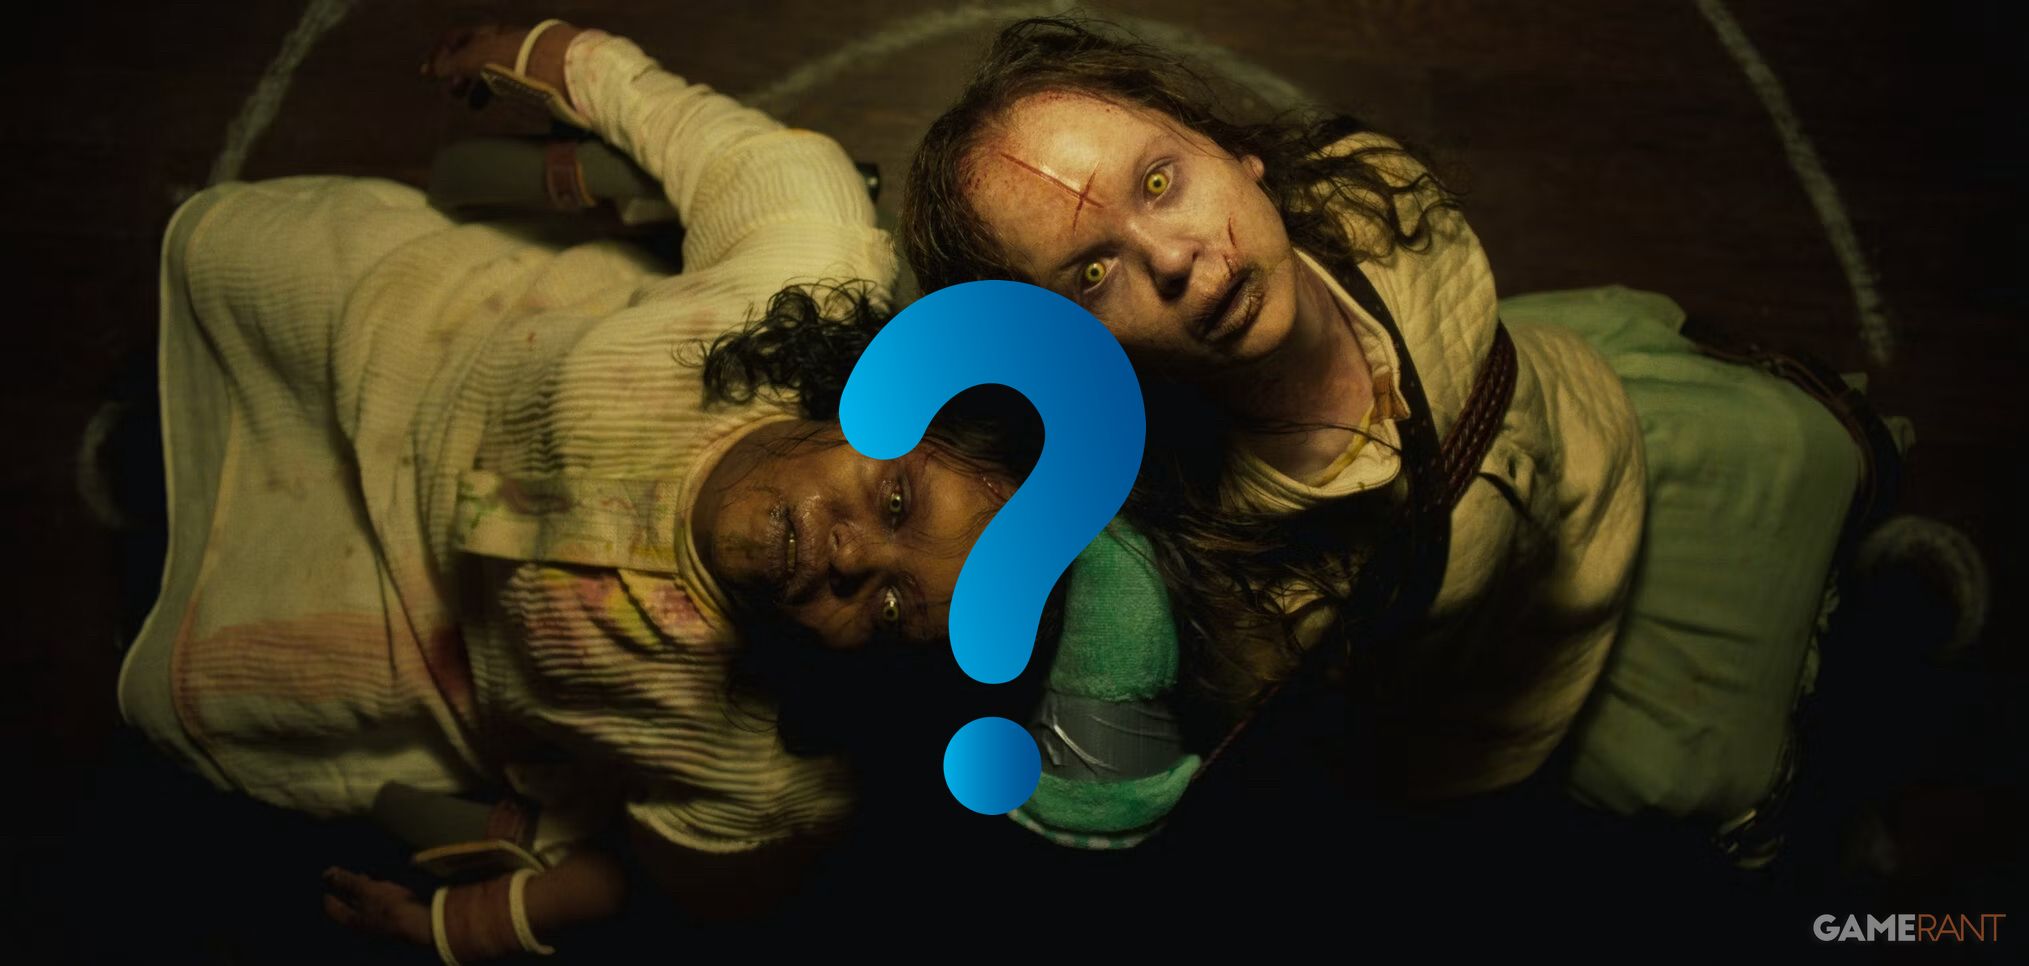 the exorcist believer screencap with question mark